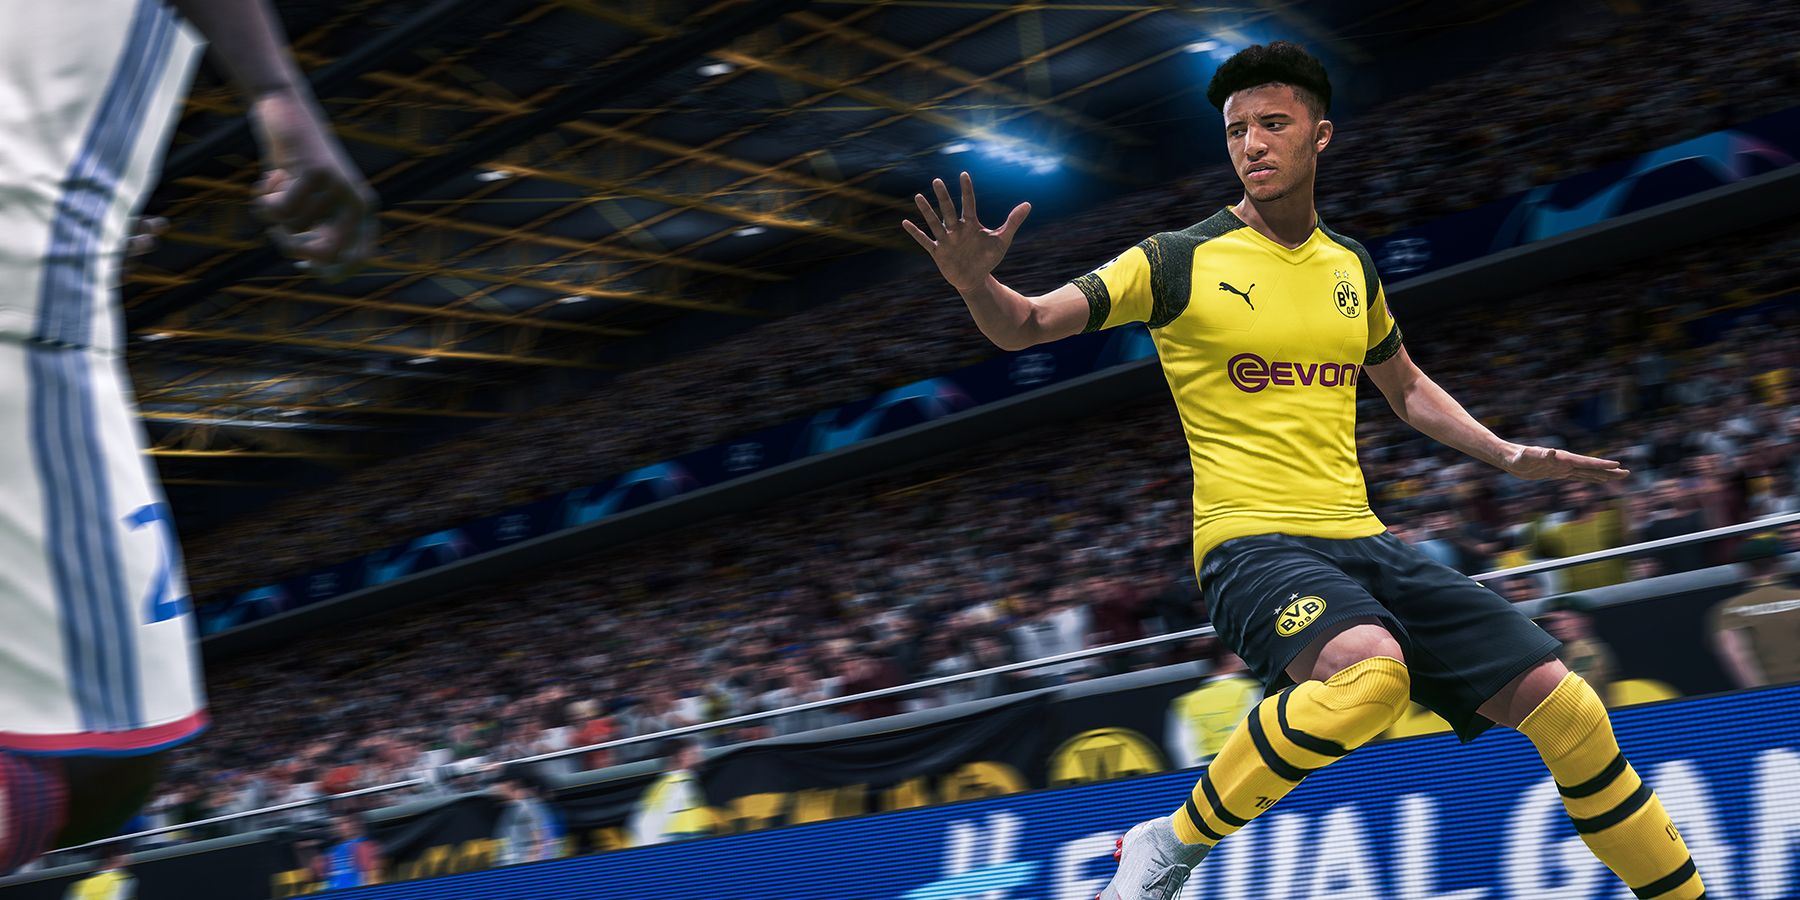 FIFA 20 screenshot, which heavily features loot boxes in Ultimate Team.